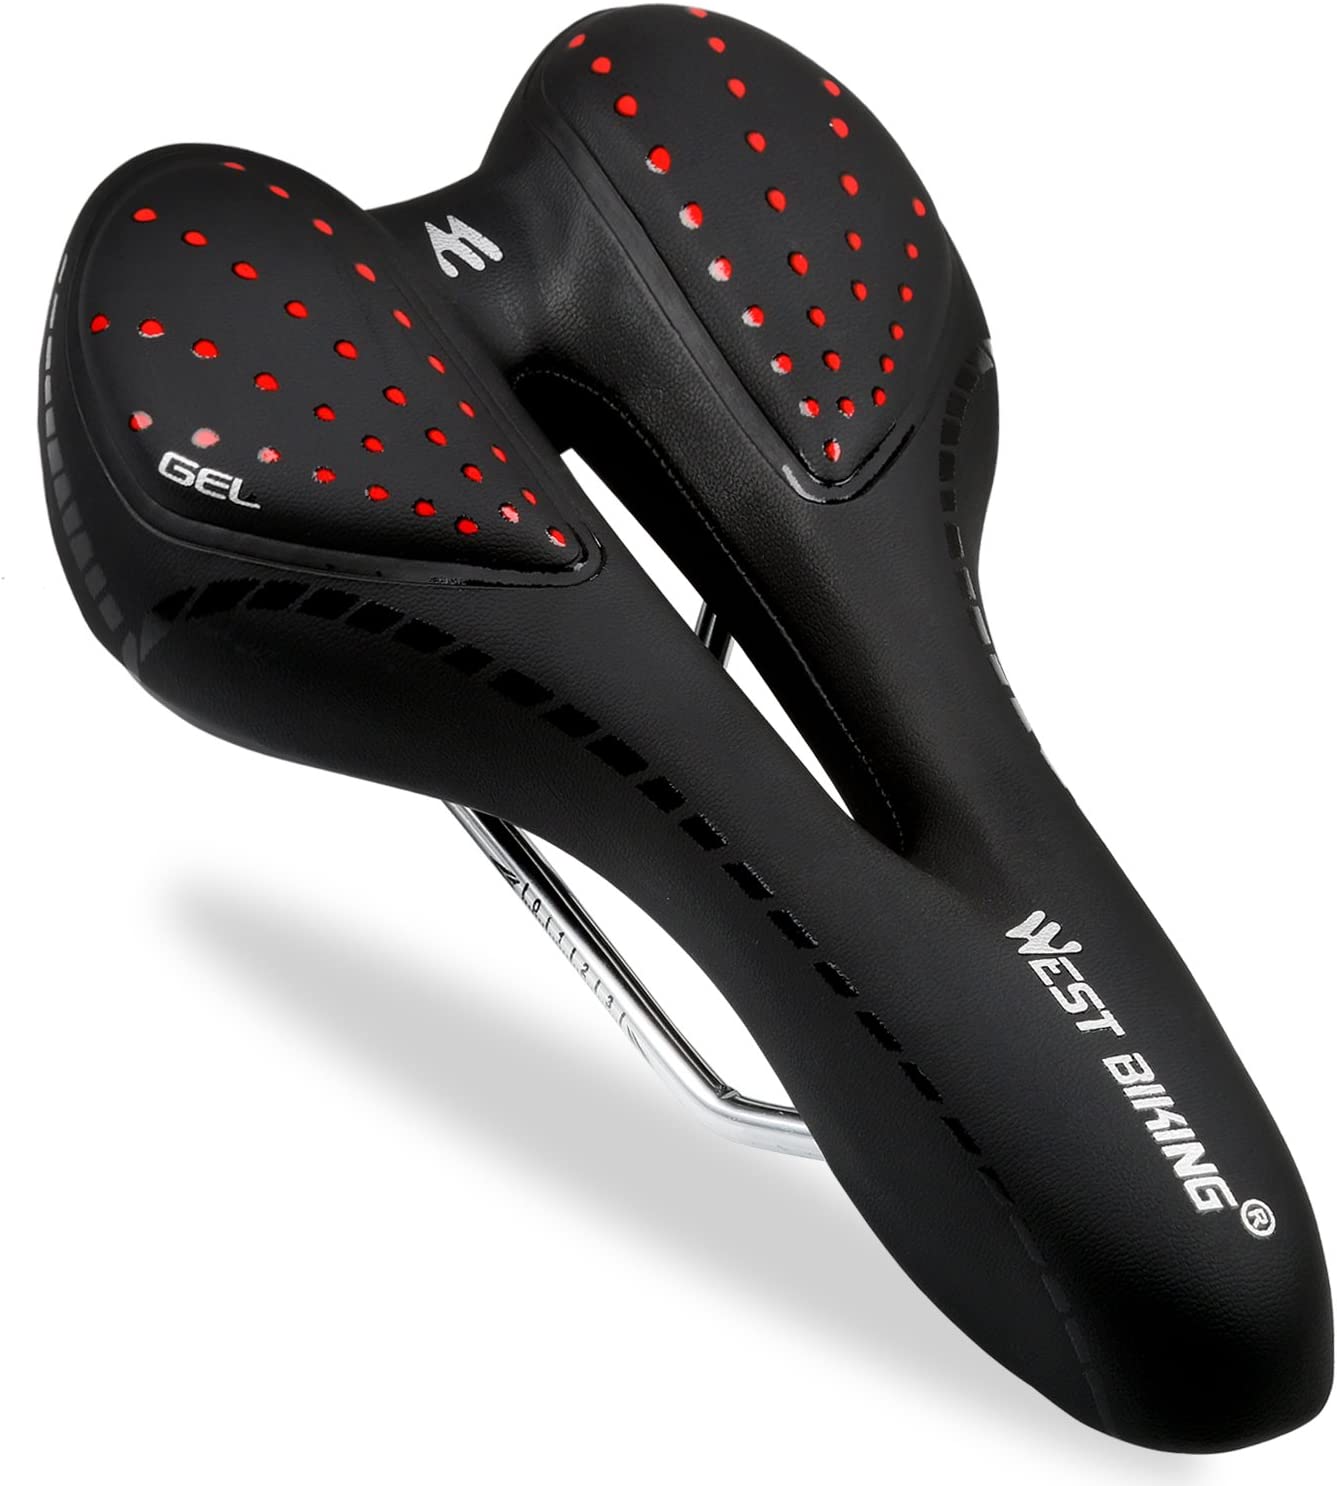 Your mountain bike saddle should have a grippy surface to stop you from sliding around too much.